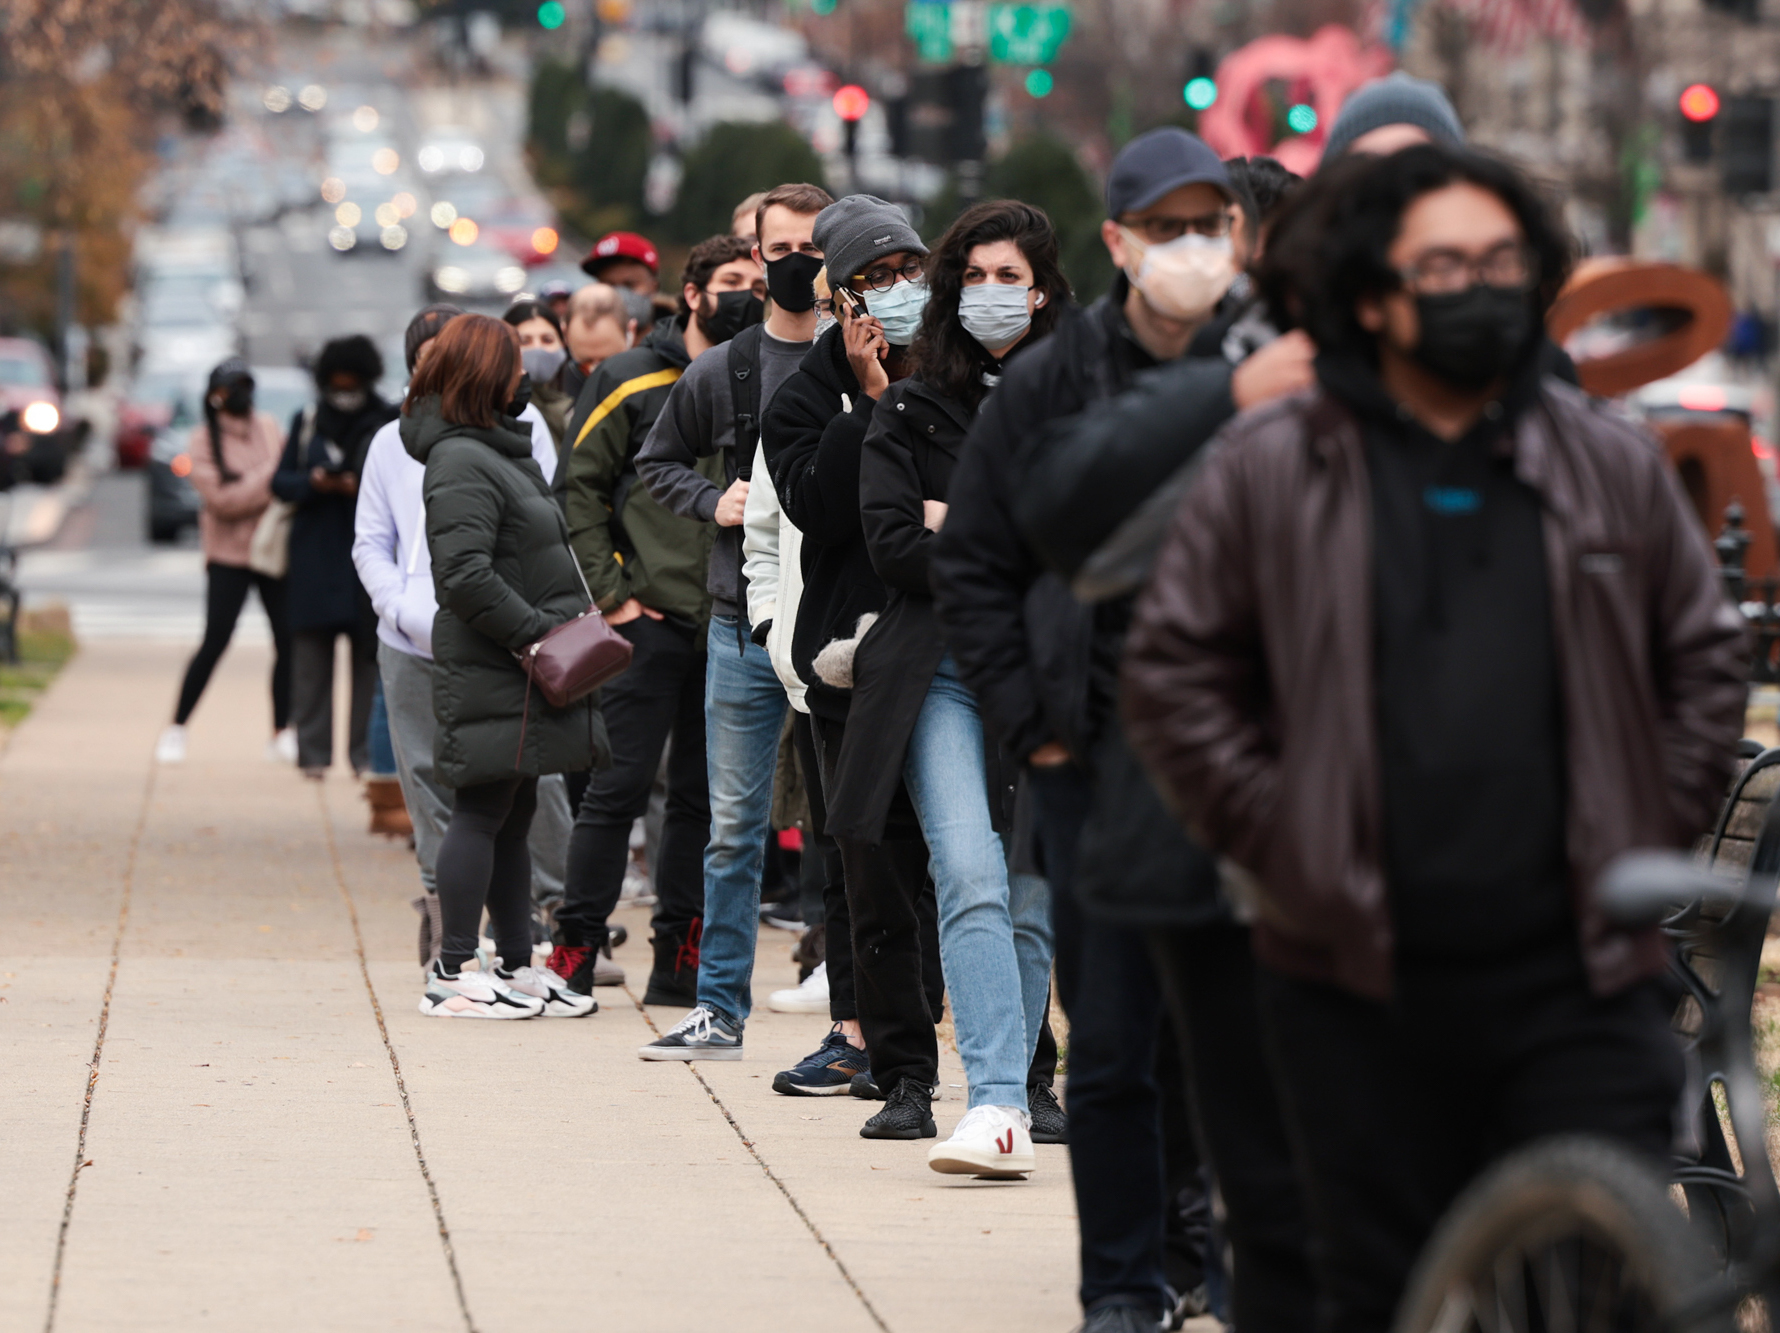 A lone line of people with masks on outside.